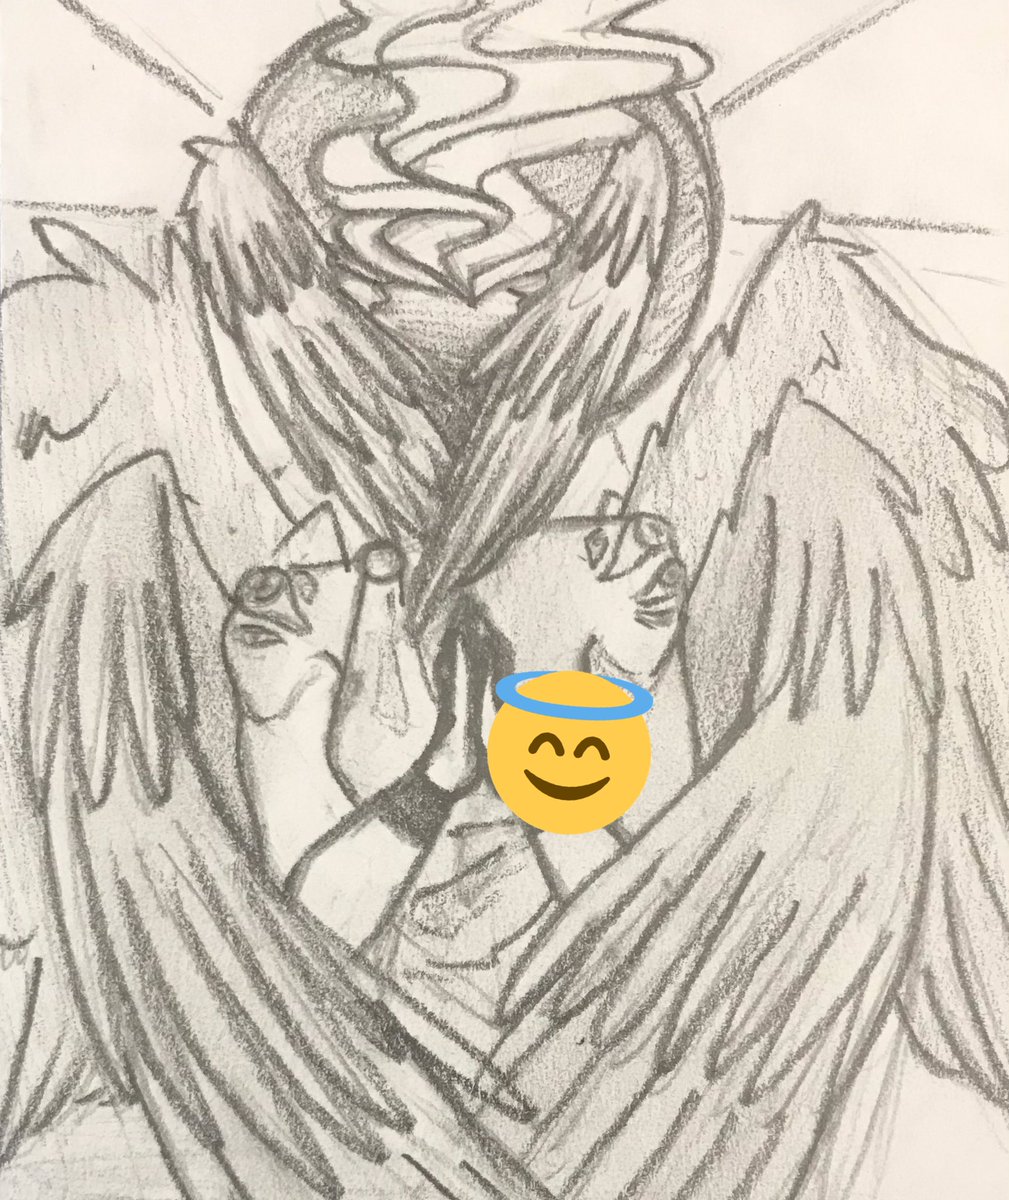 Okay so I started sketching out the angels and I’ve finished a tiny sketch of the Seraph artwork.